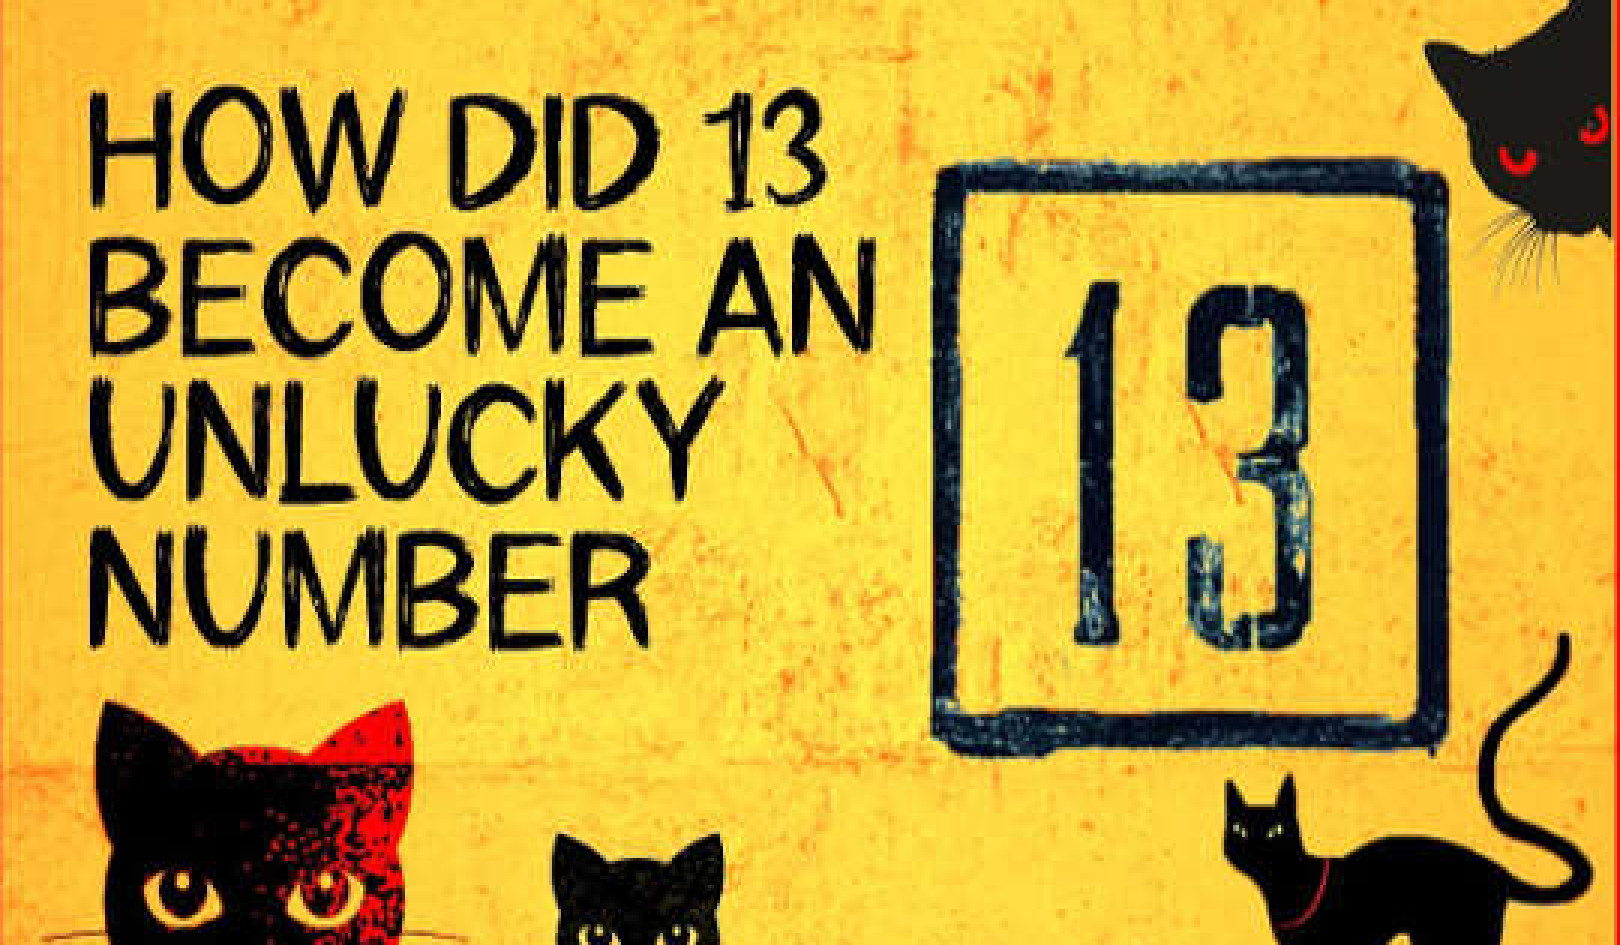 Why Is The Number 13 Considered Unlucky?